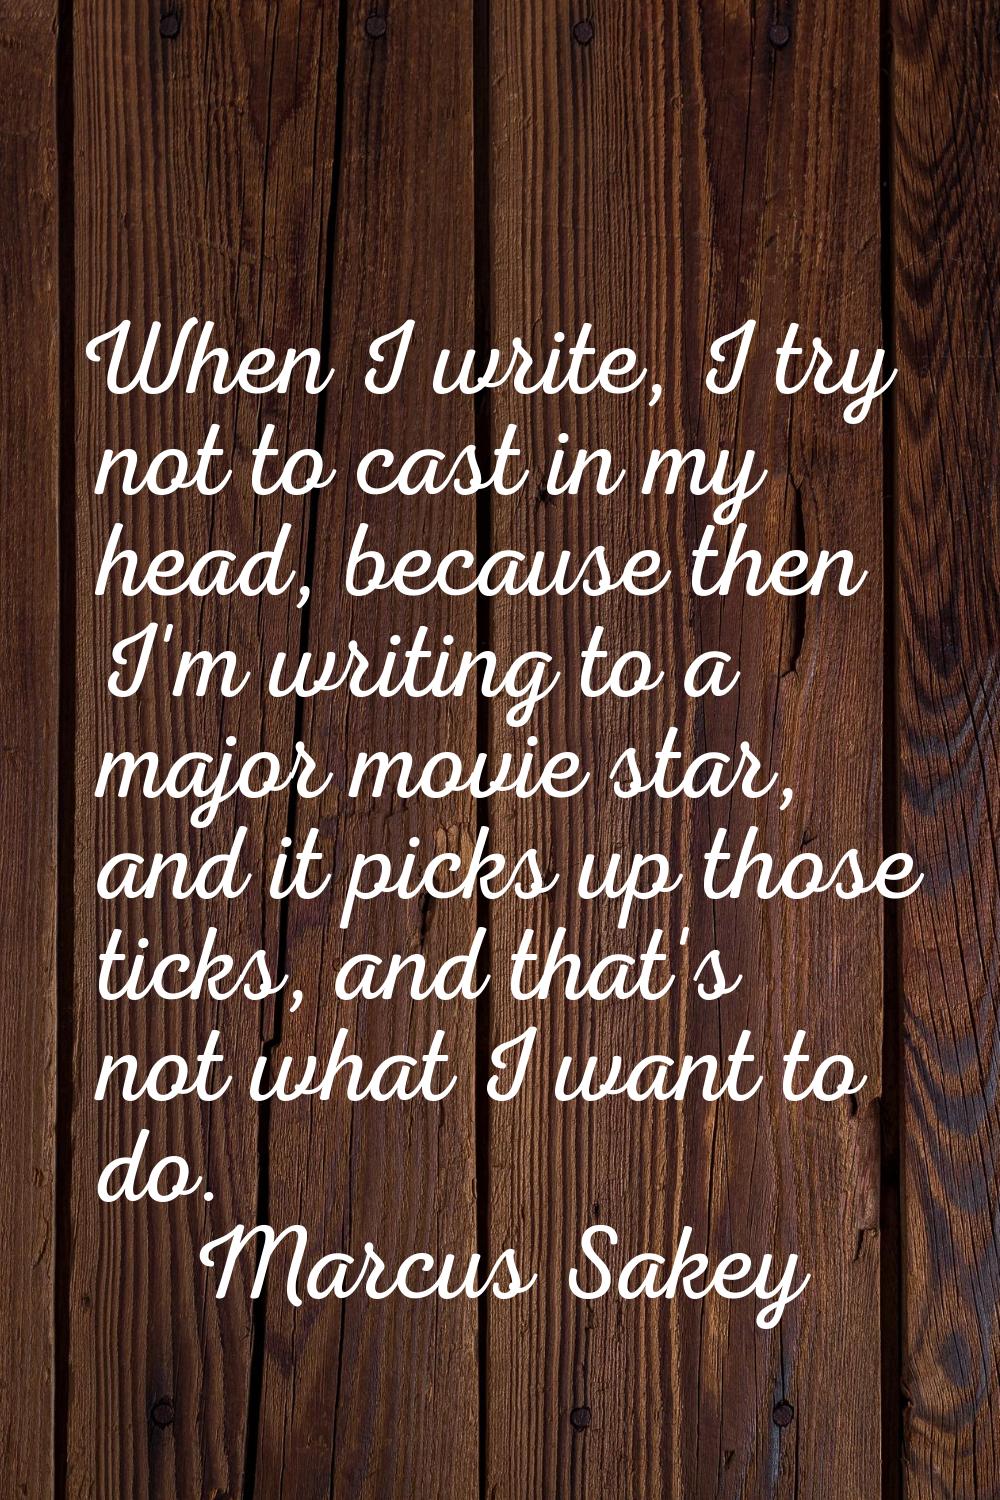 When I write, I try not to cast in my head, because then I'm writing to a major movie star, and it 